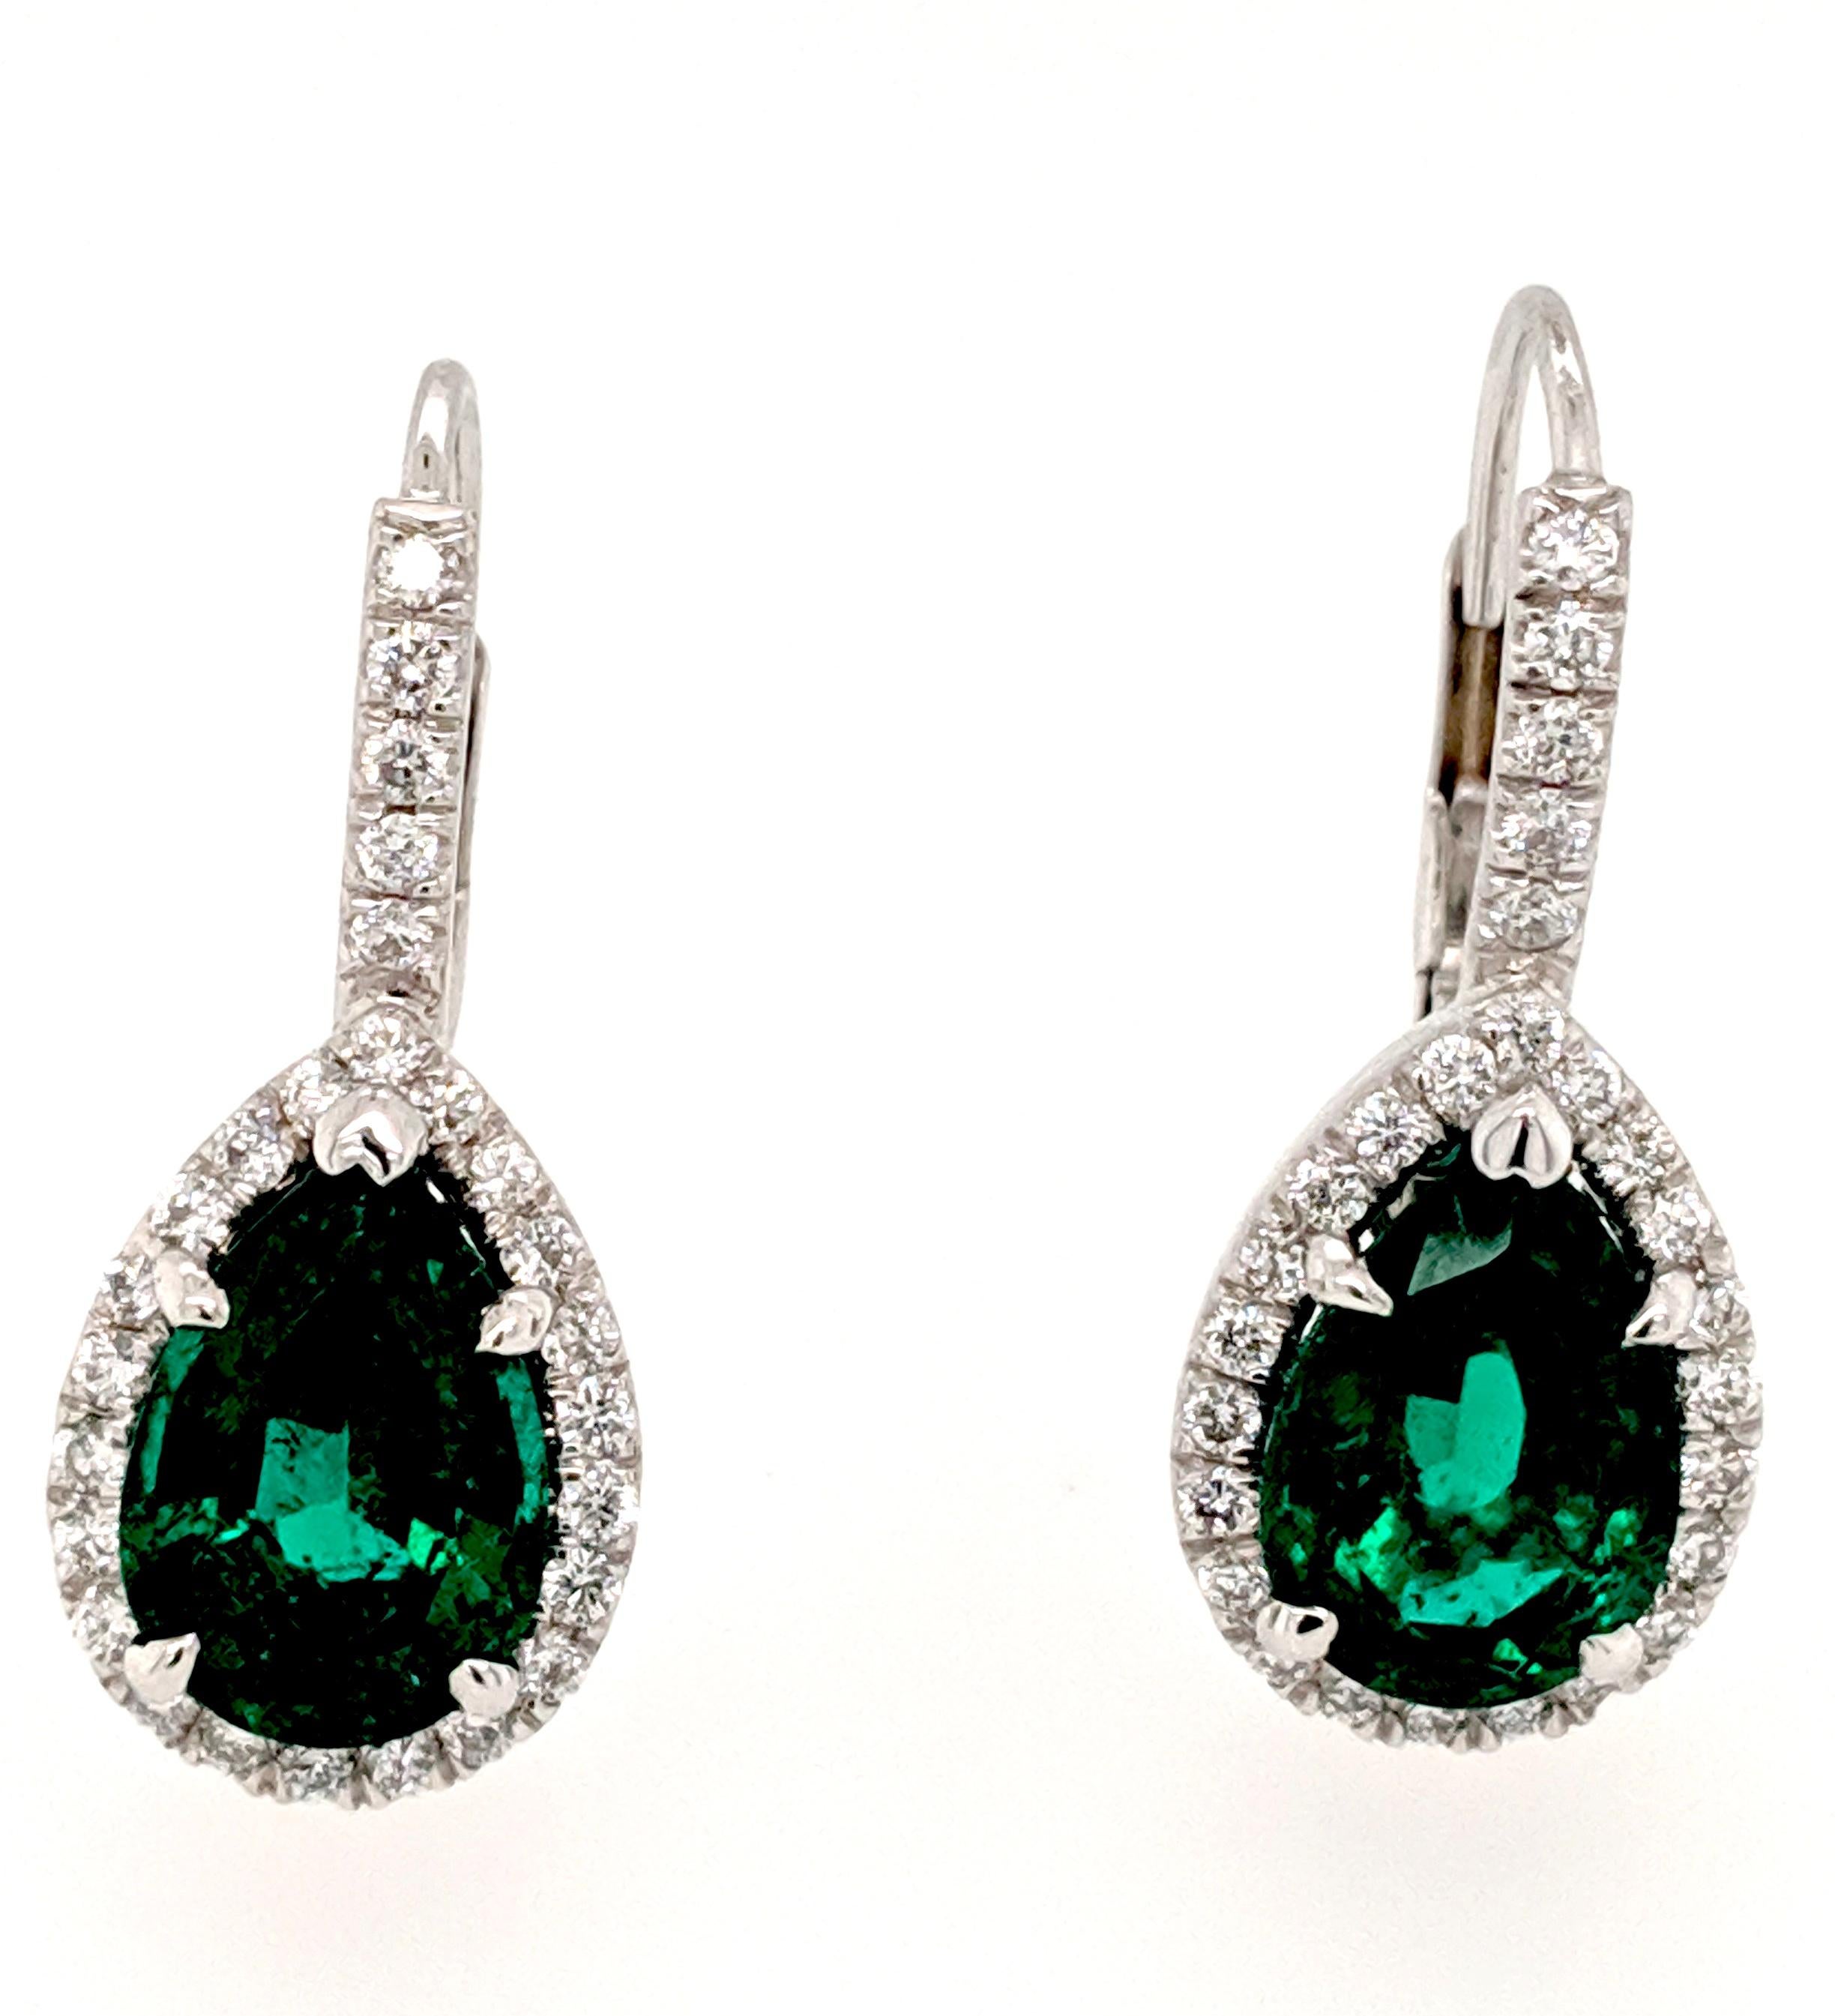 4.88 Carat African Pear Shape Emerald and Diamond Earrings with Lever Backs In New Condition For Sale In Greenville, DE